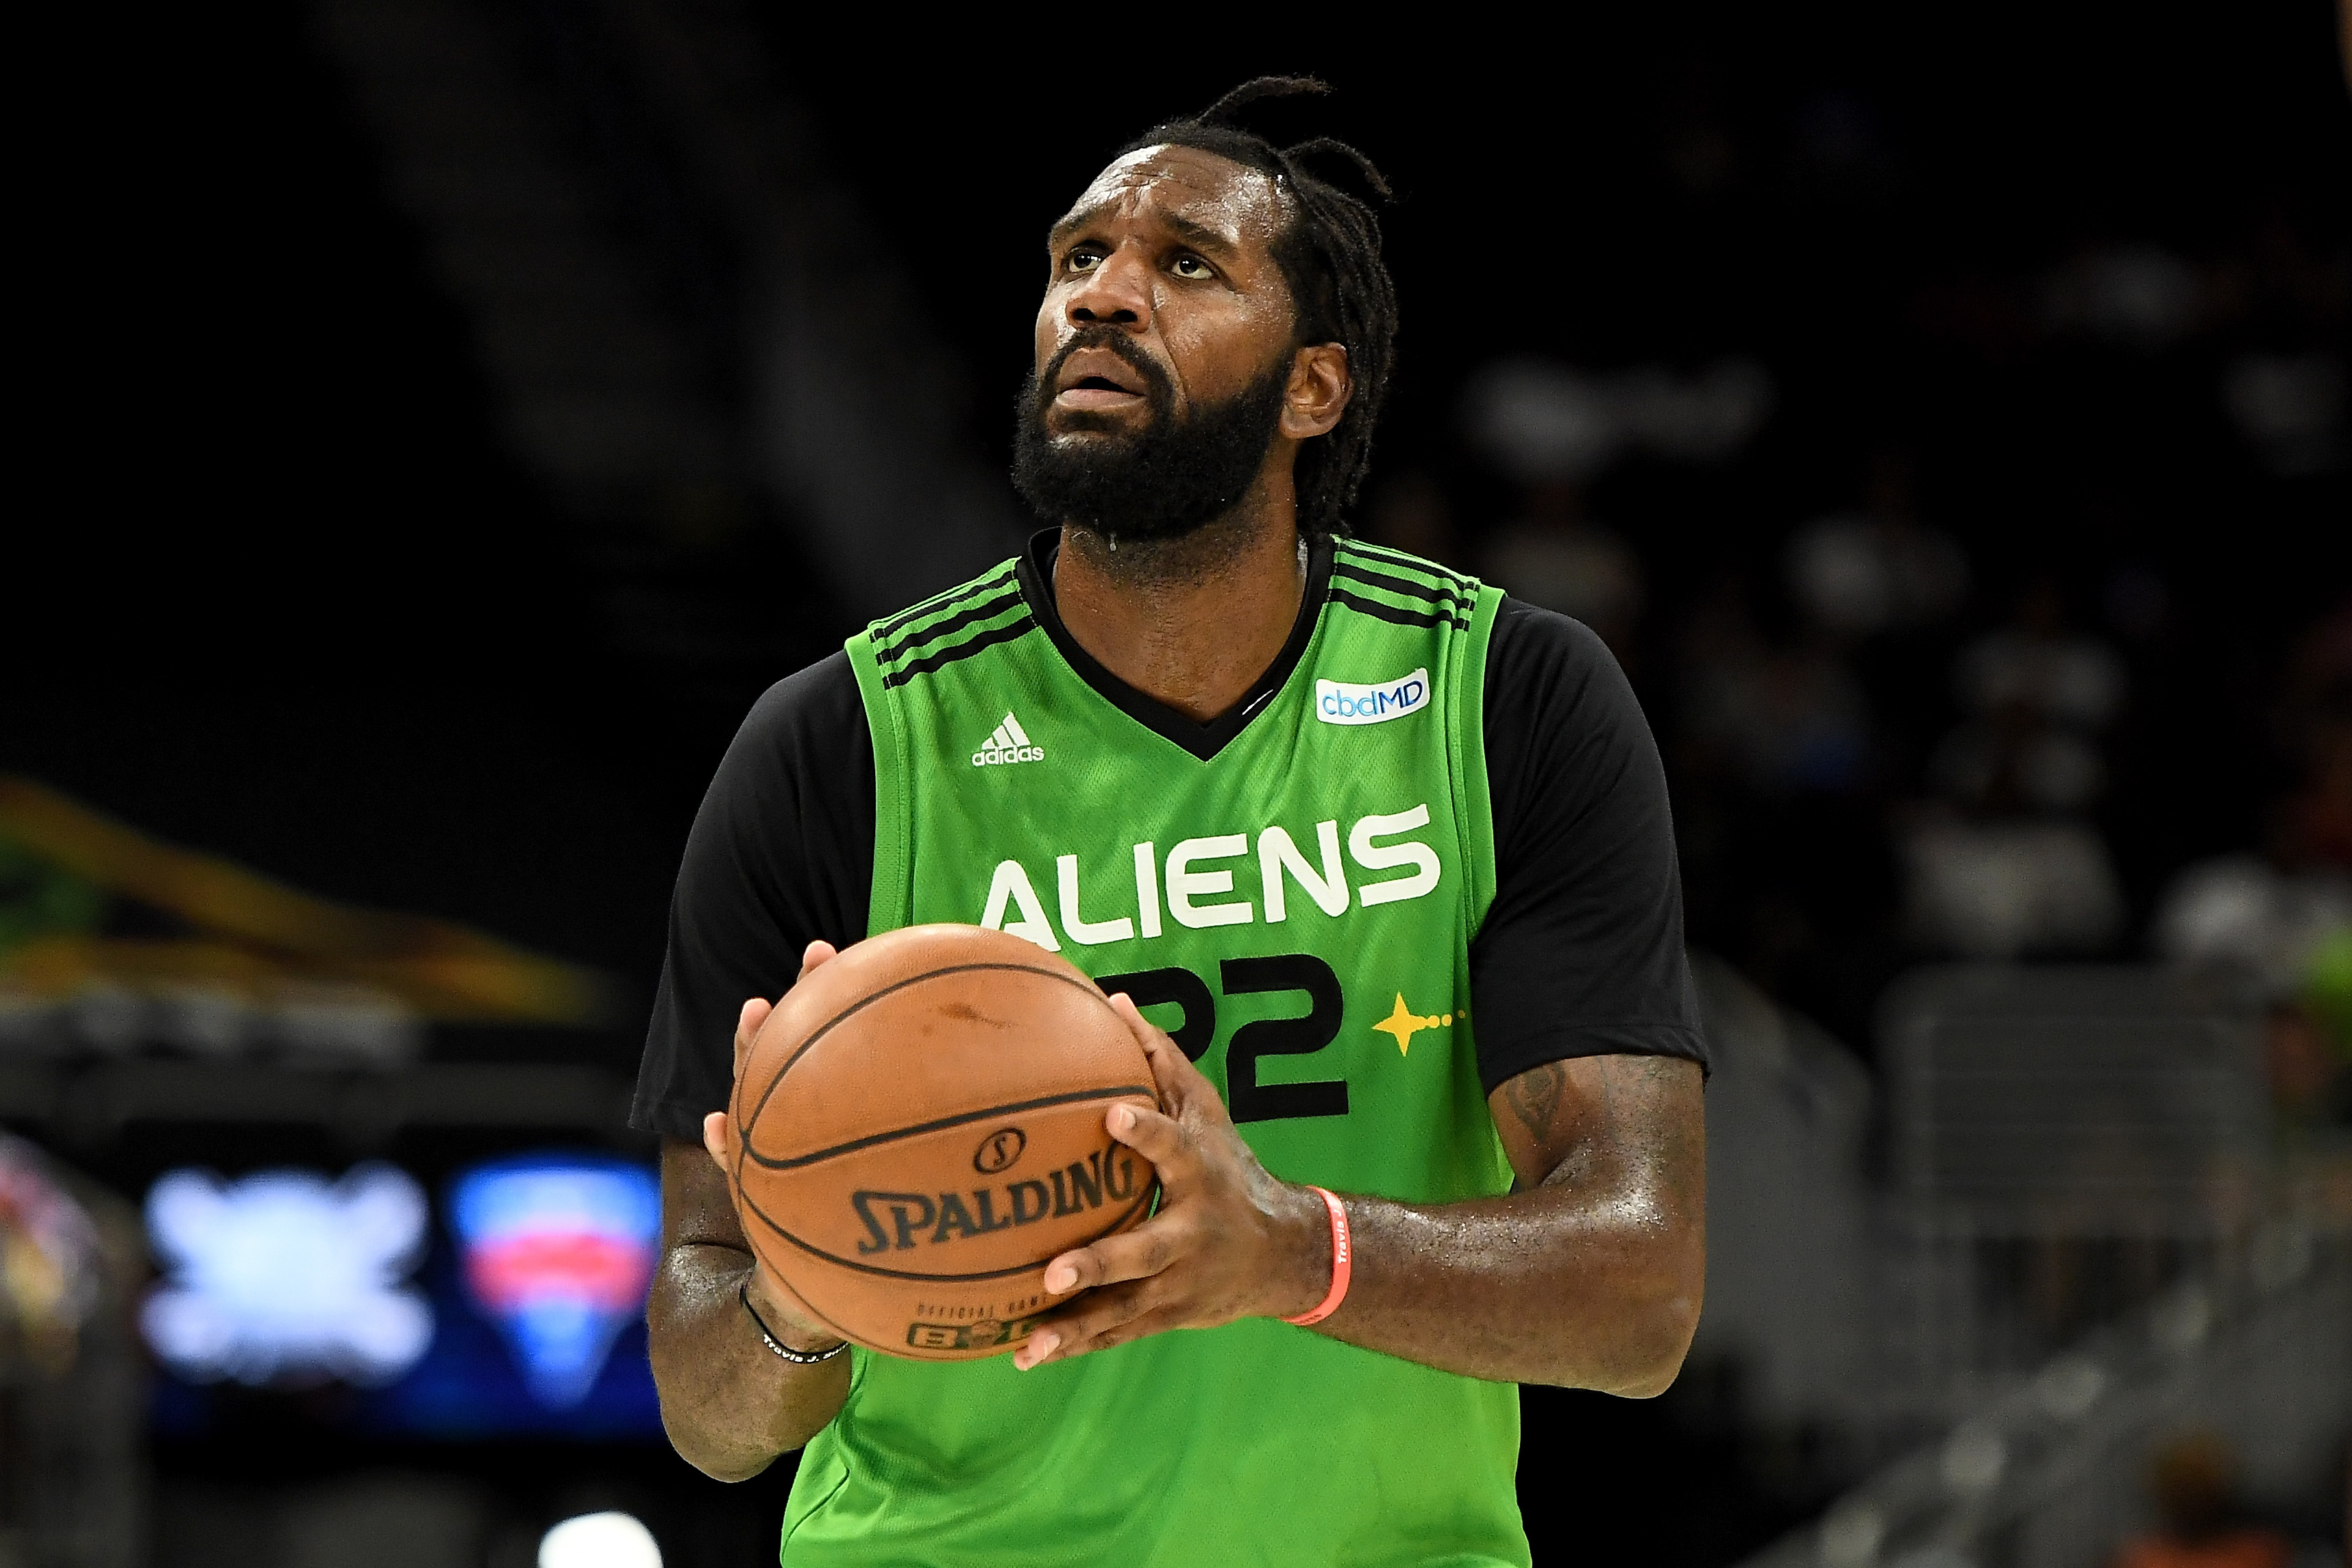 Greg Oden could've been an NBA great, but he flamed out of the league and became a mediocre player in the Chinese Basketball Association.